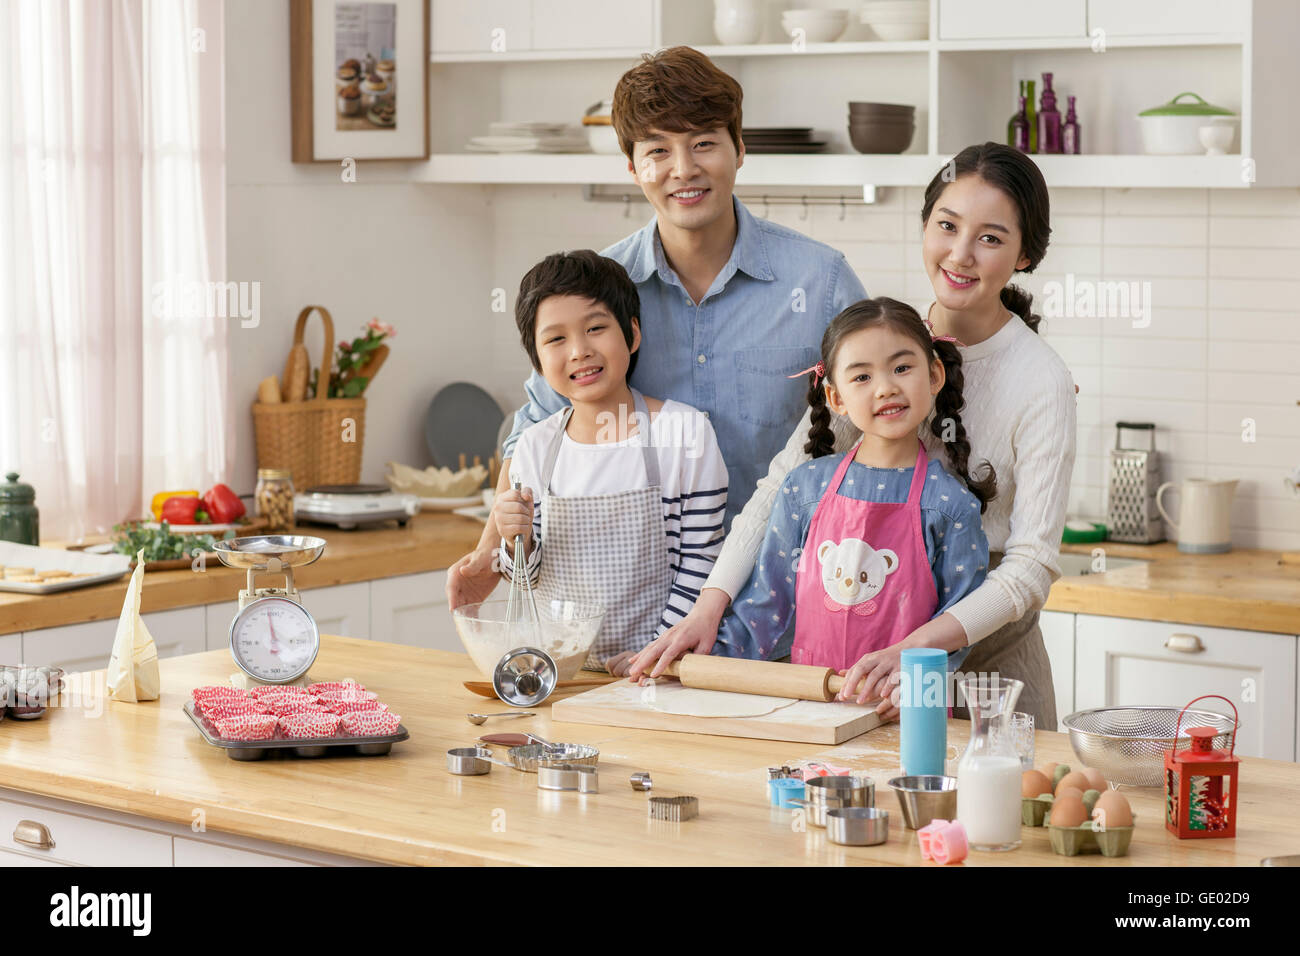 Harmonious family cooking together in kitchen Stock Photo